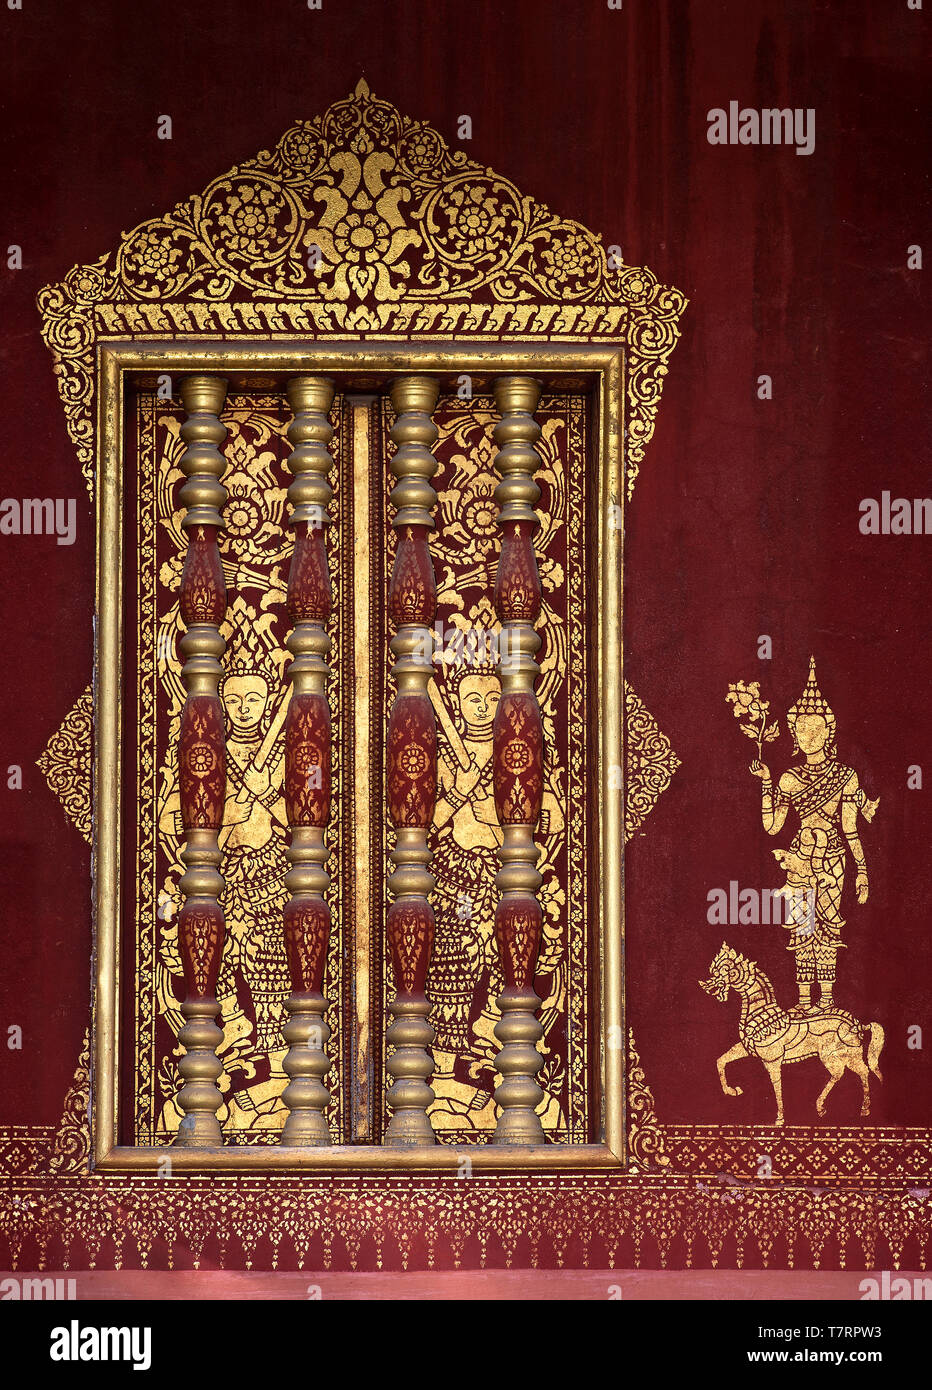 Windows accented with Khmer-style wooden balustrades and gilded murals stencils of a deity, Temple Wat Sensoukharam,  Luang Prabang, Laos Stock Photo